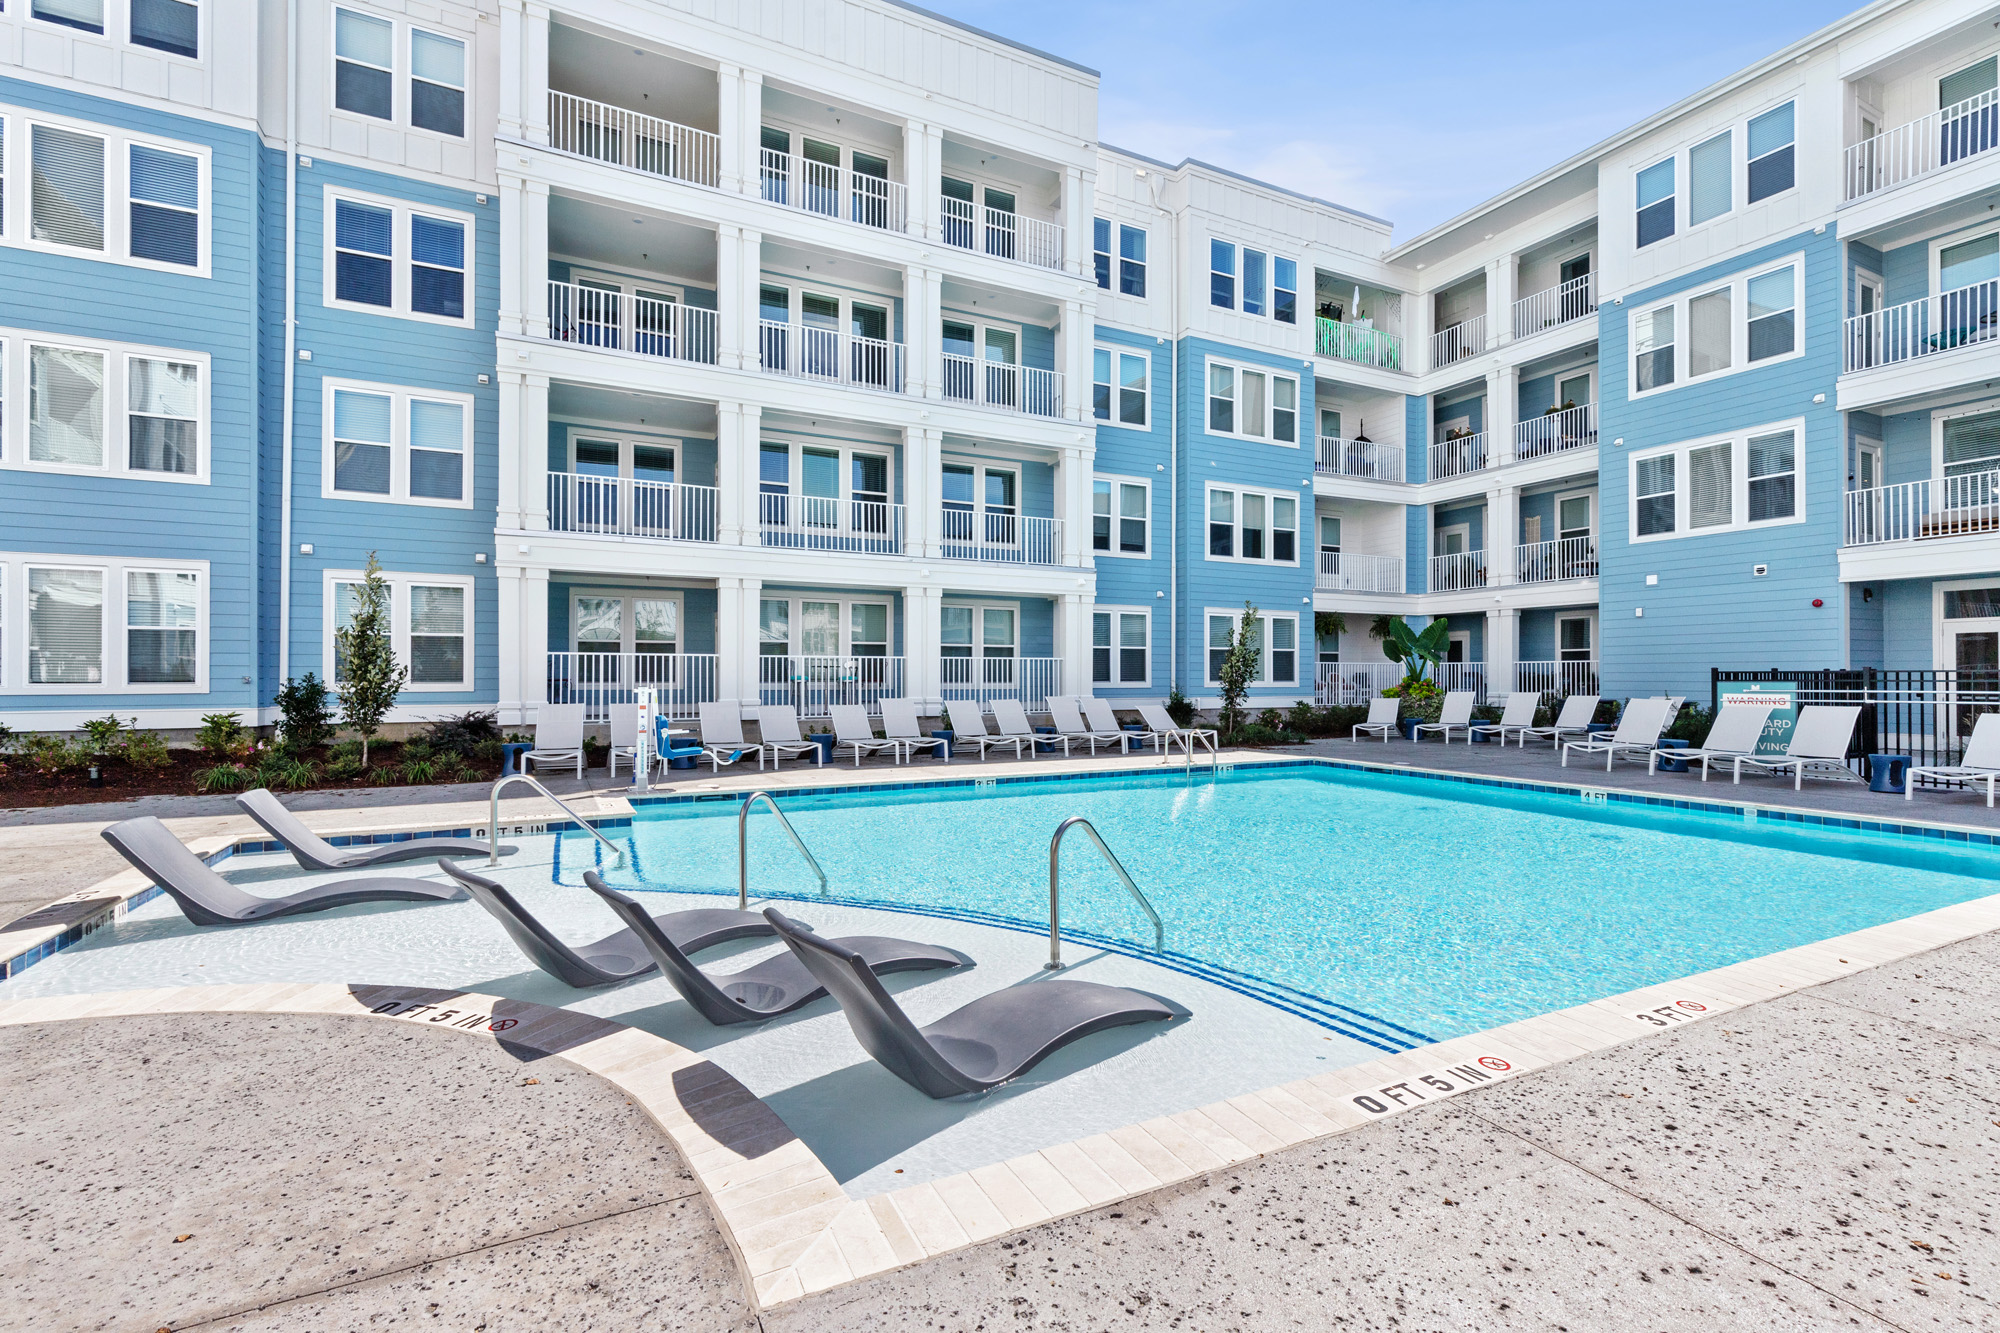 Oasis at Riverlights Apartments